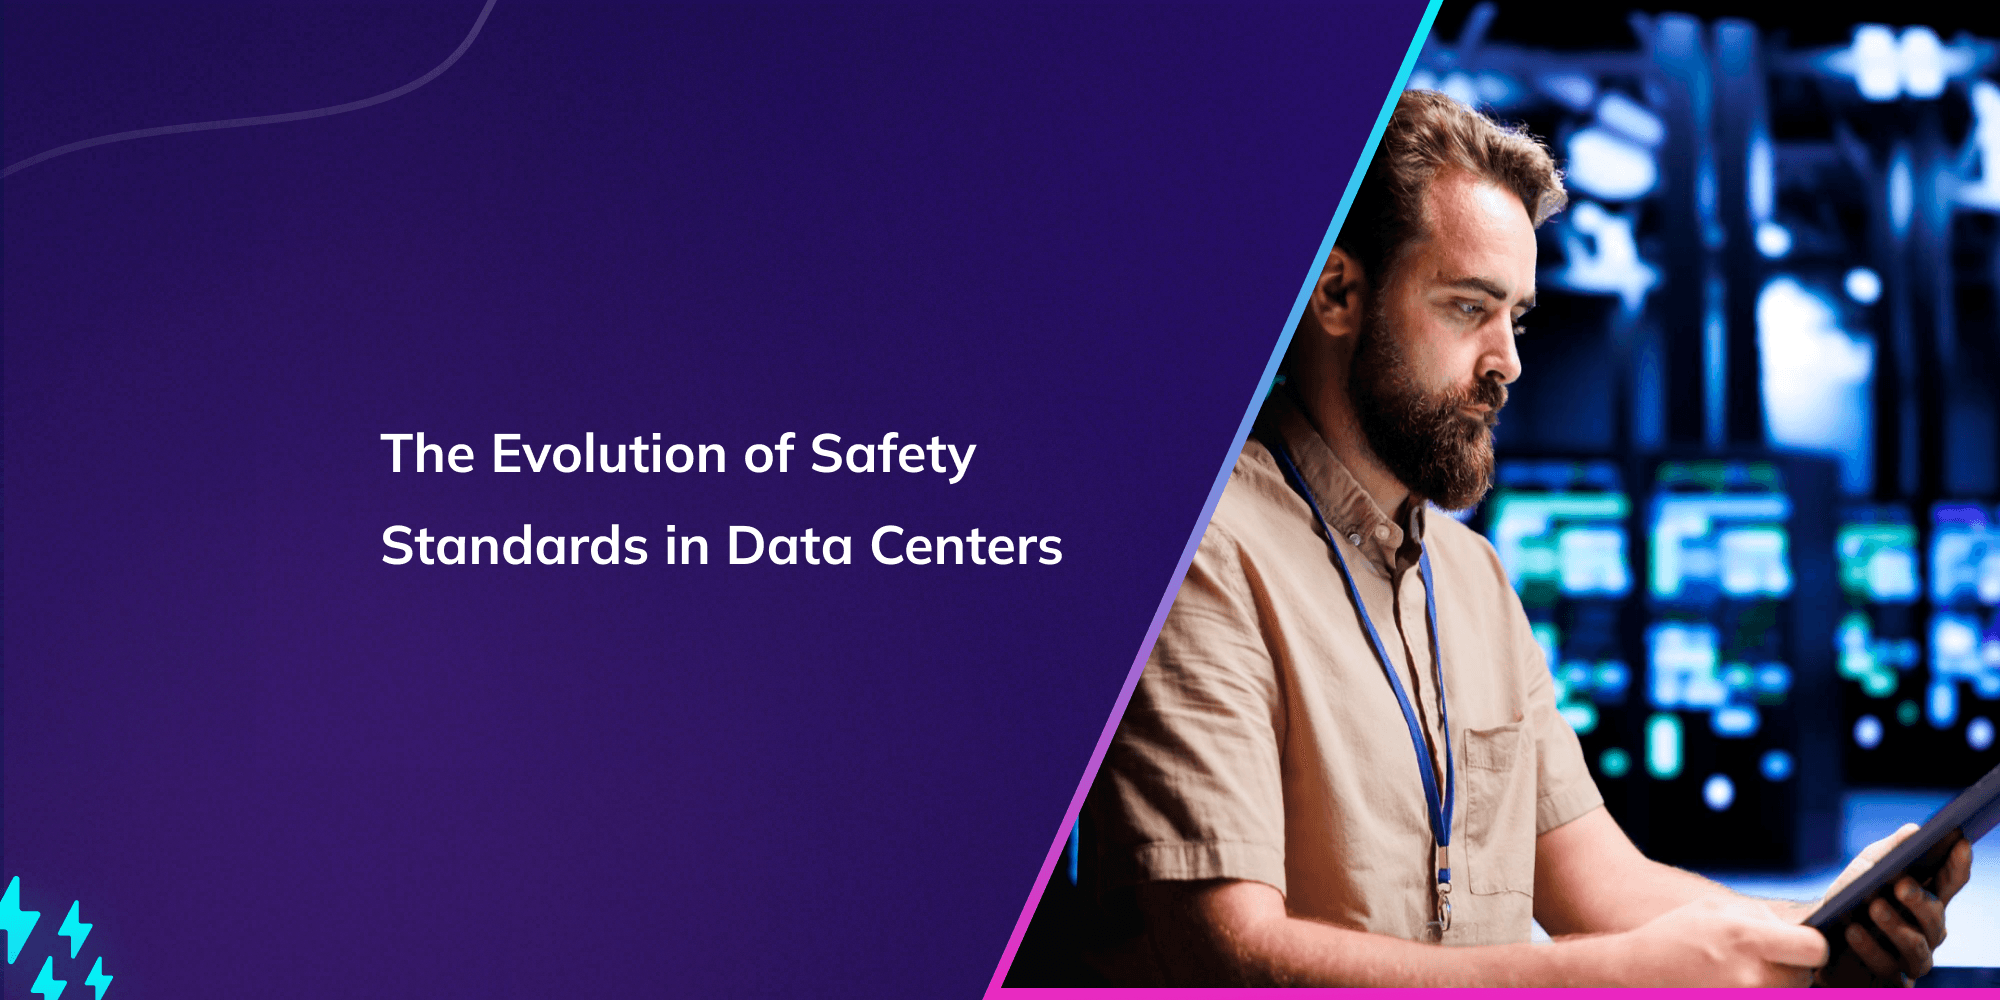 The Evolution of Safety Standards in Data Centers: An article diving into how safety measures have evolved in data centers